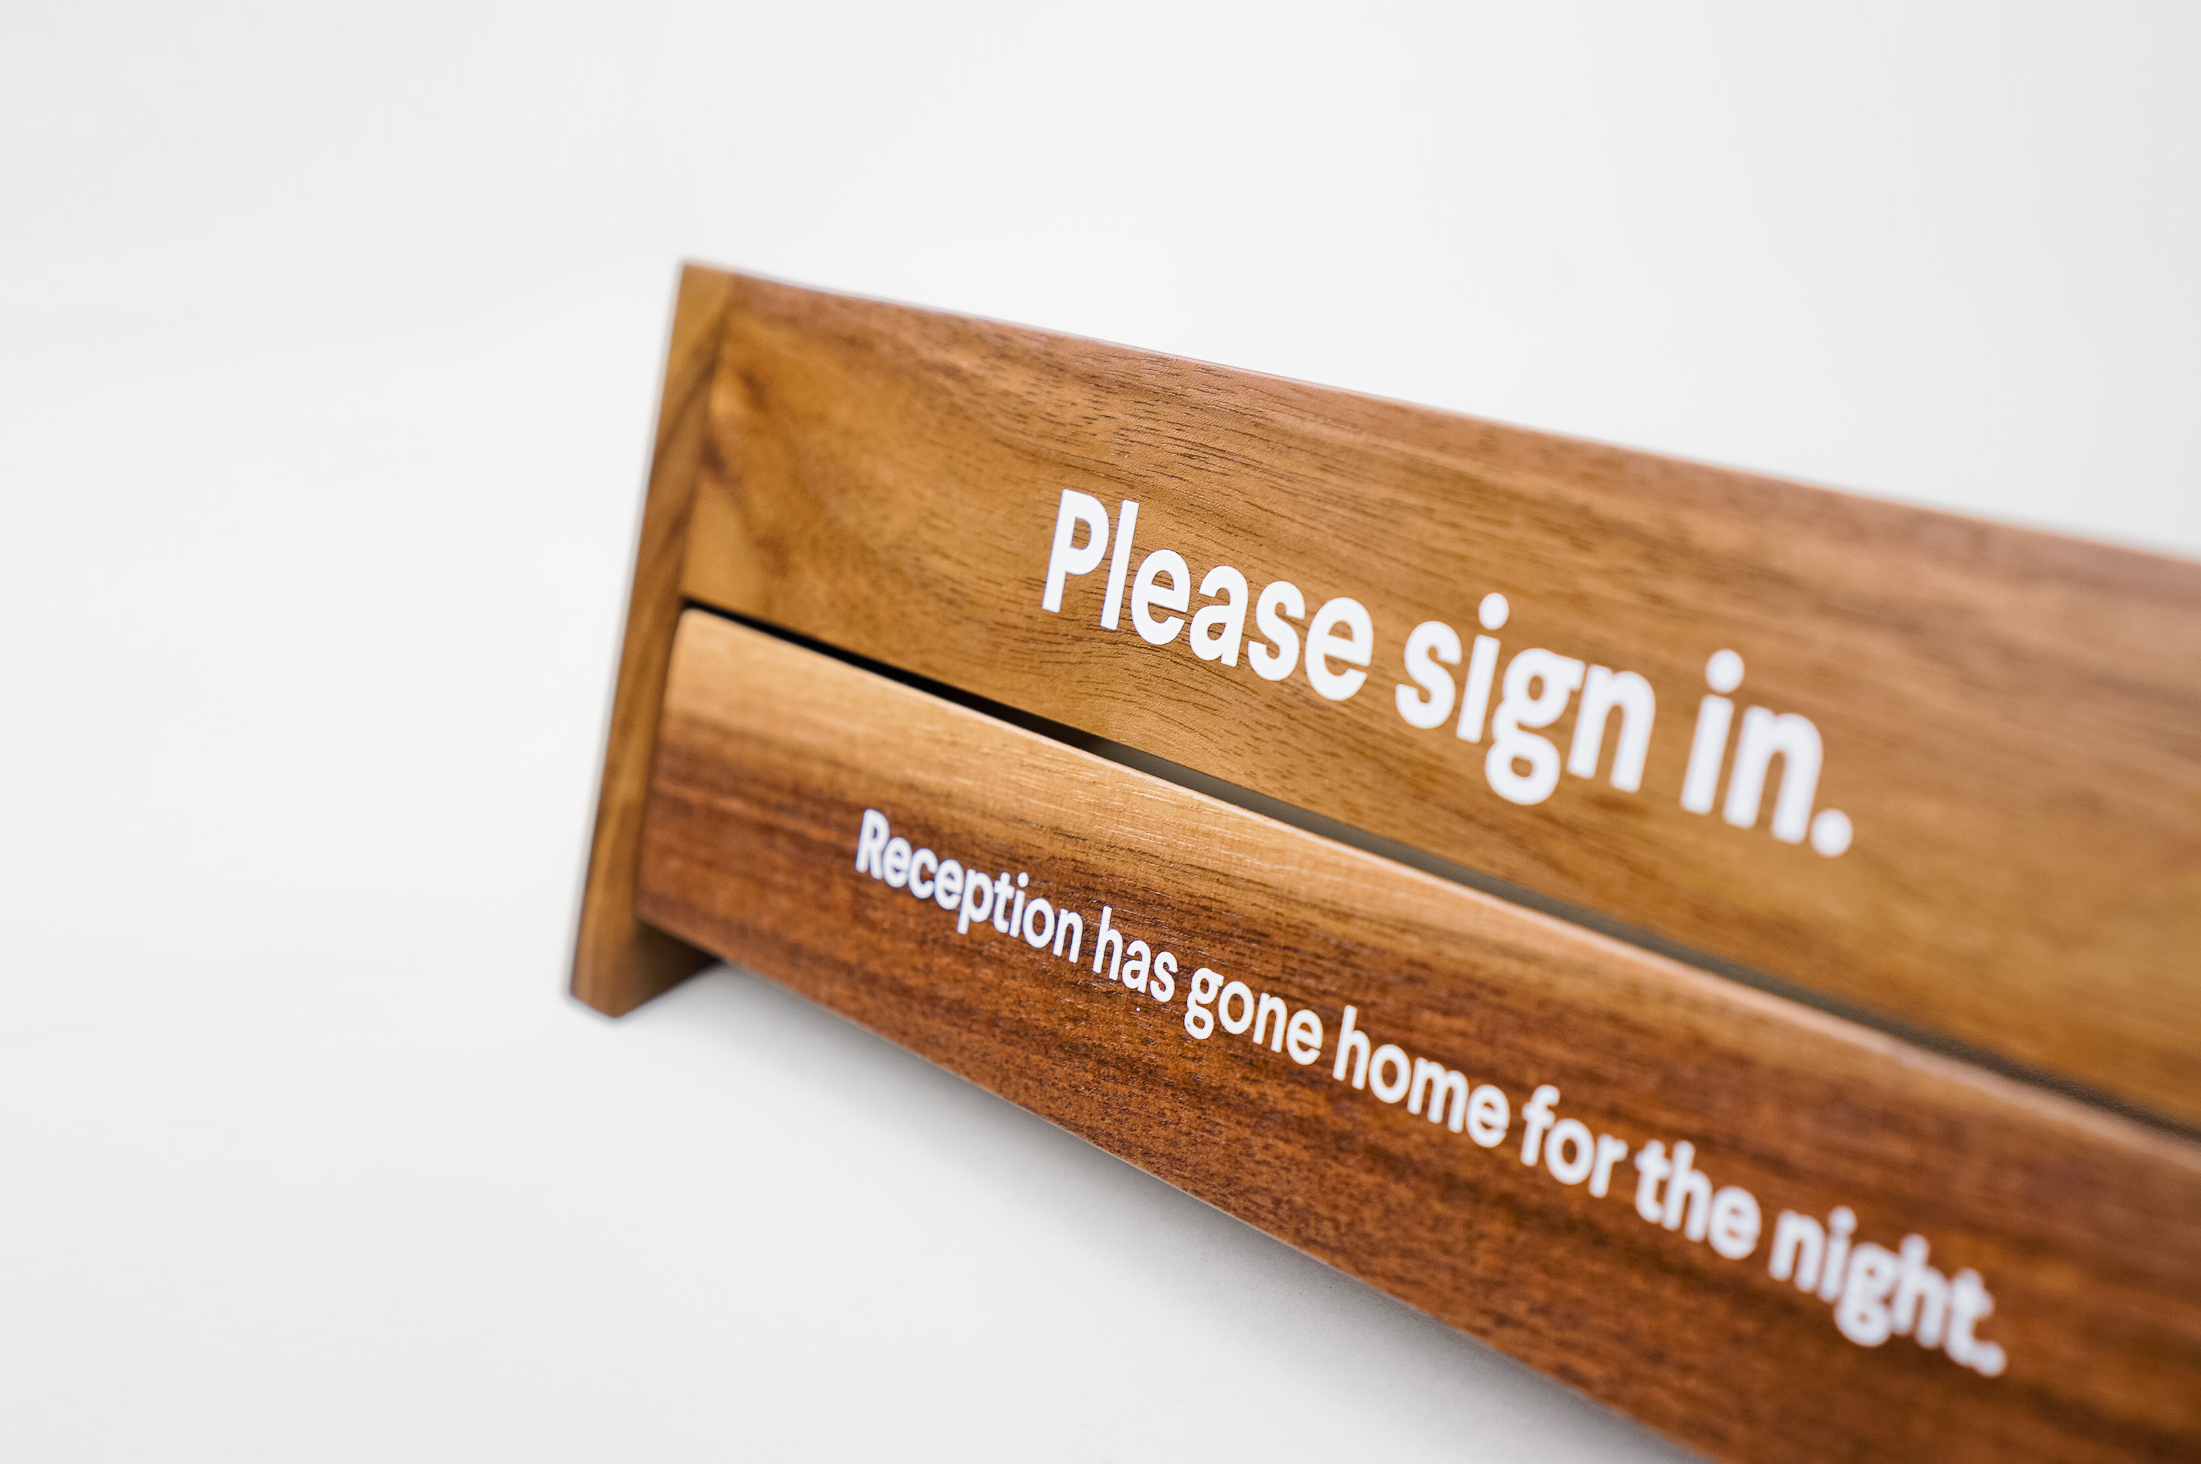 Rotating wood reception sign with various away messages for Slack, an American cloud-based set of team collaboration tools and services.